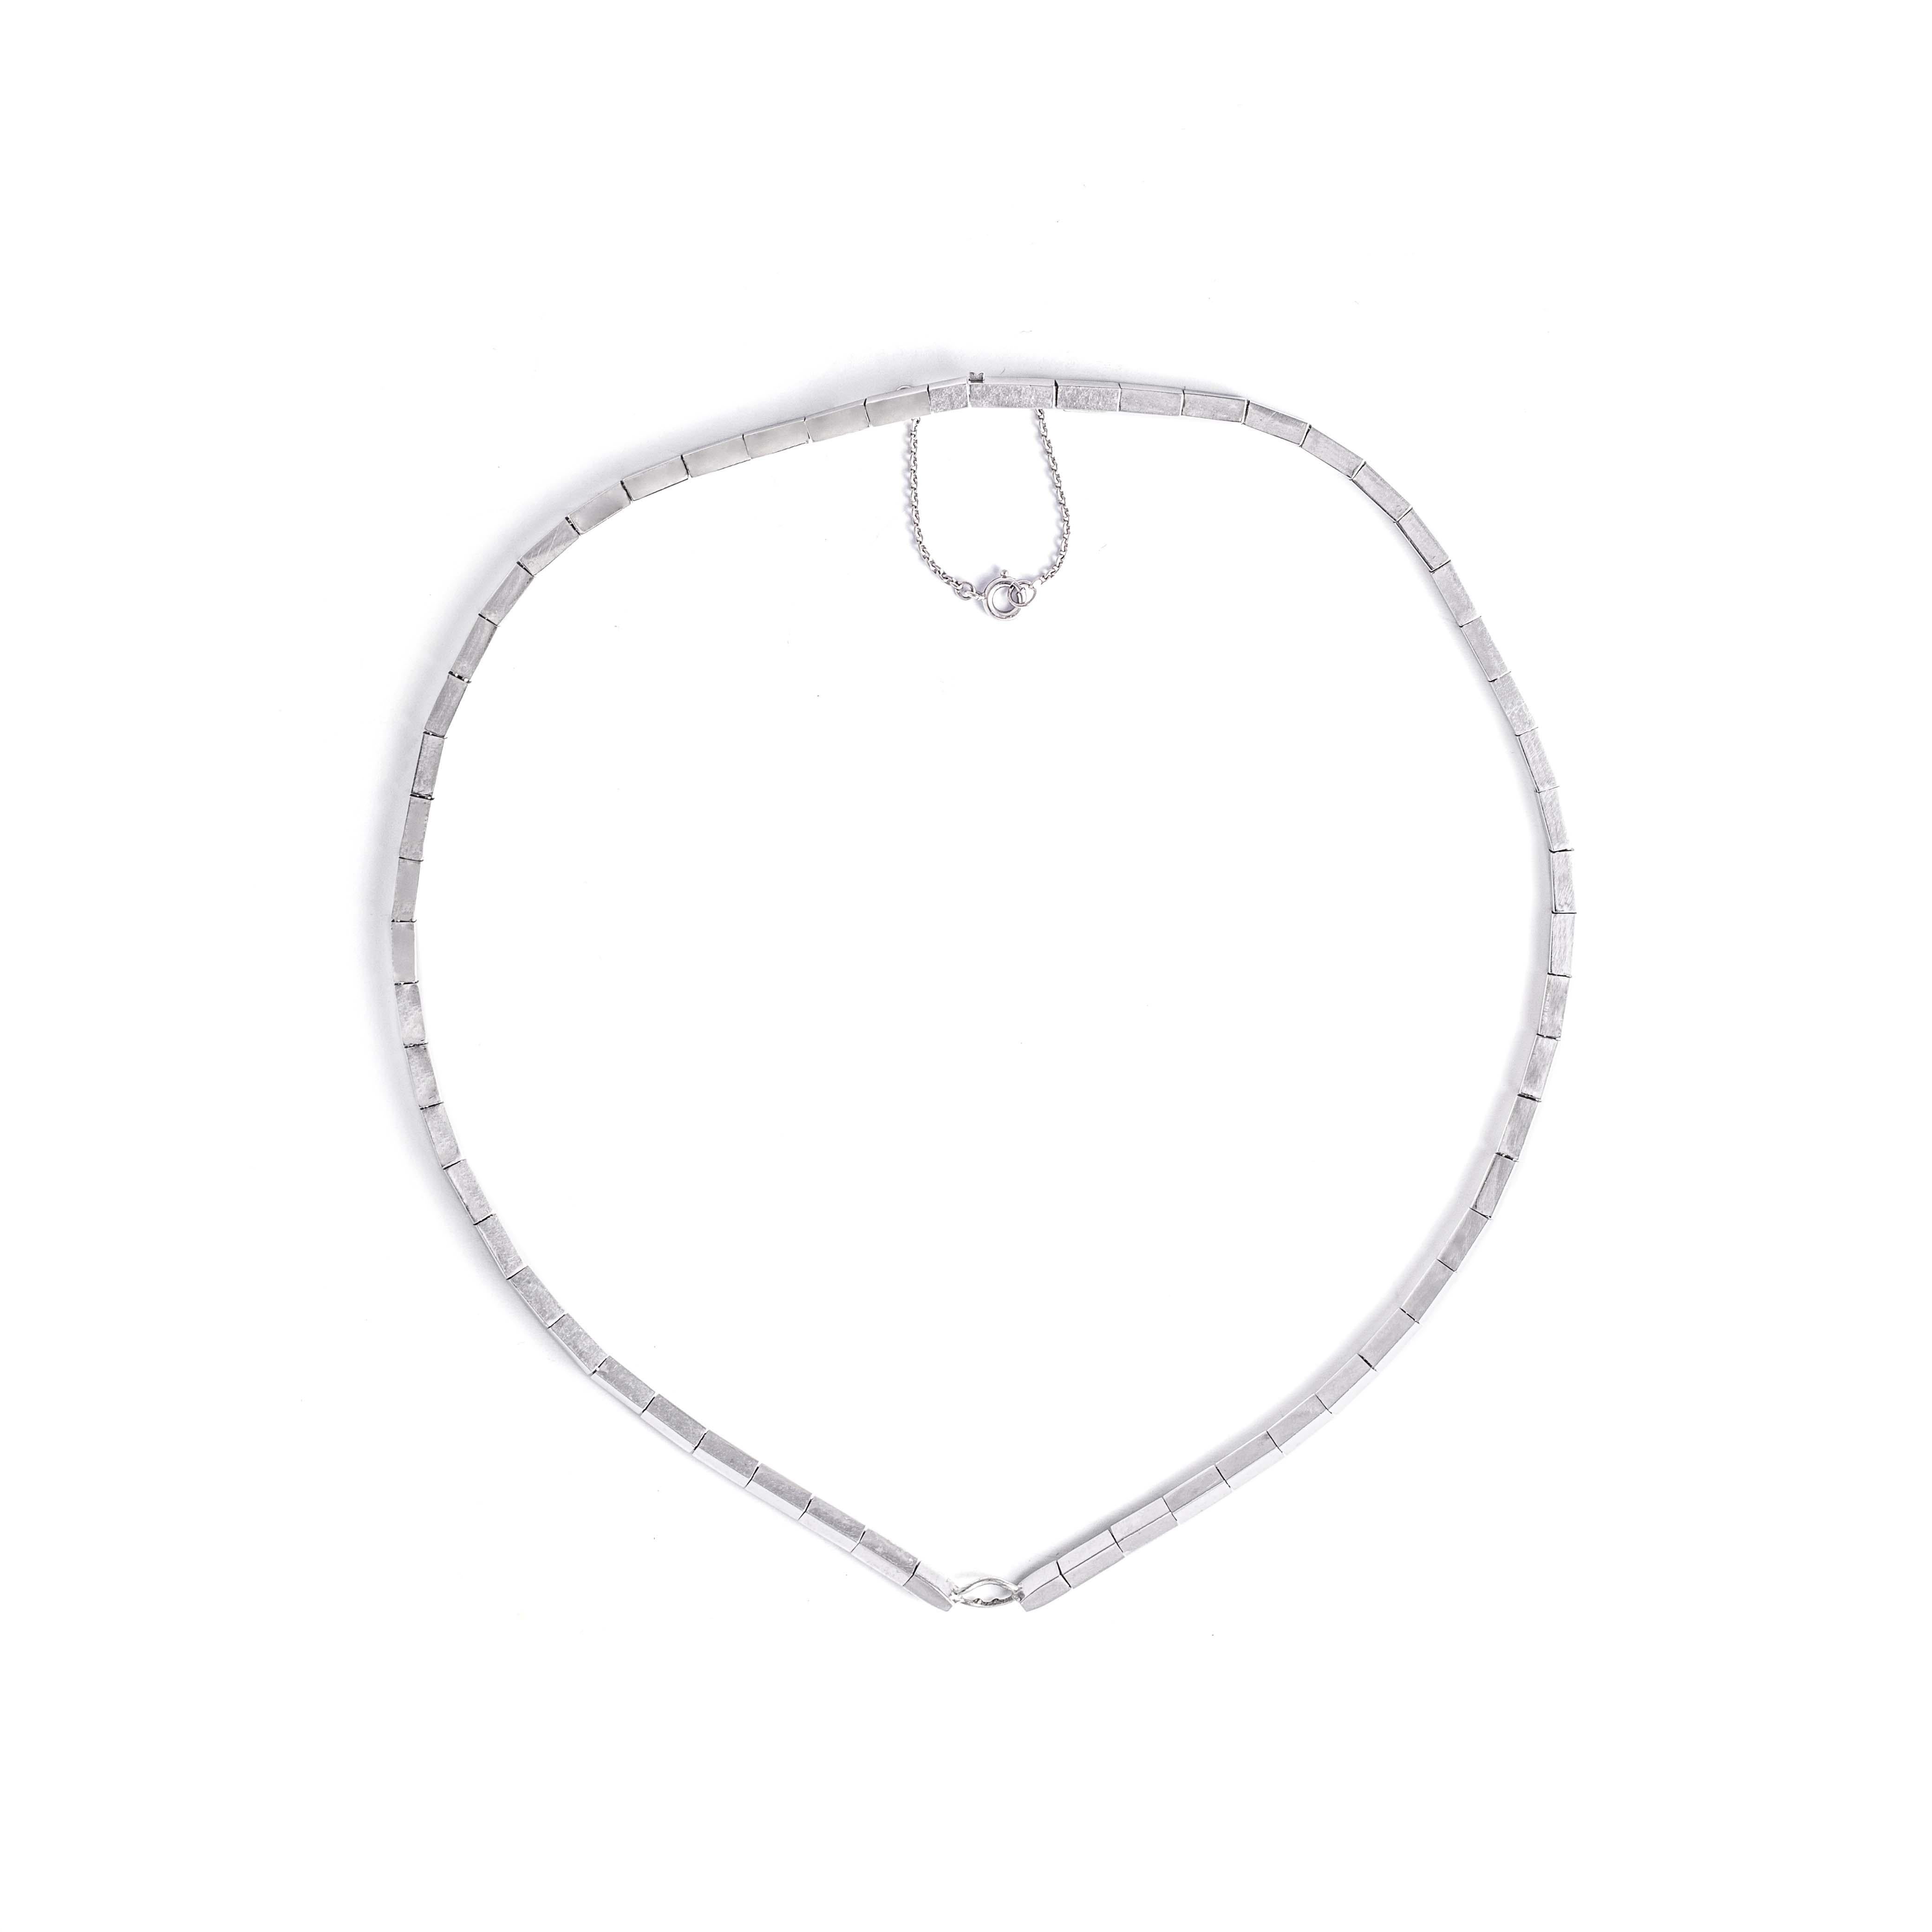 Platinum chain necklace.
Length: 42.00 centimeters. 
Total Weight: 41.82 grams.